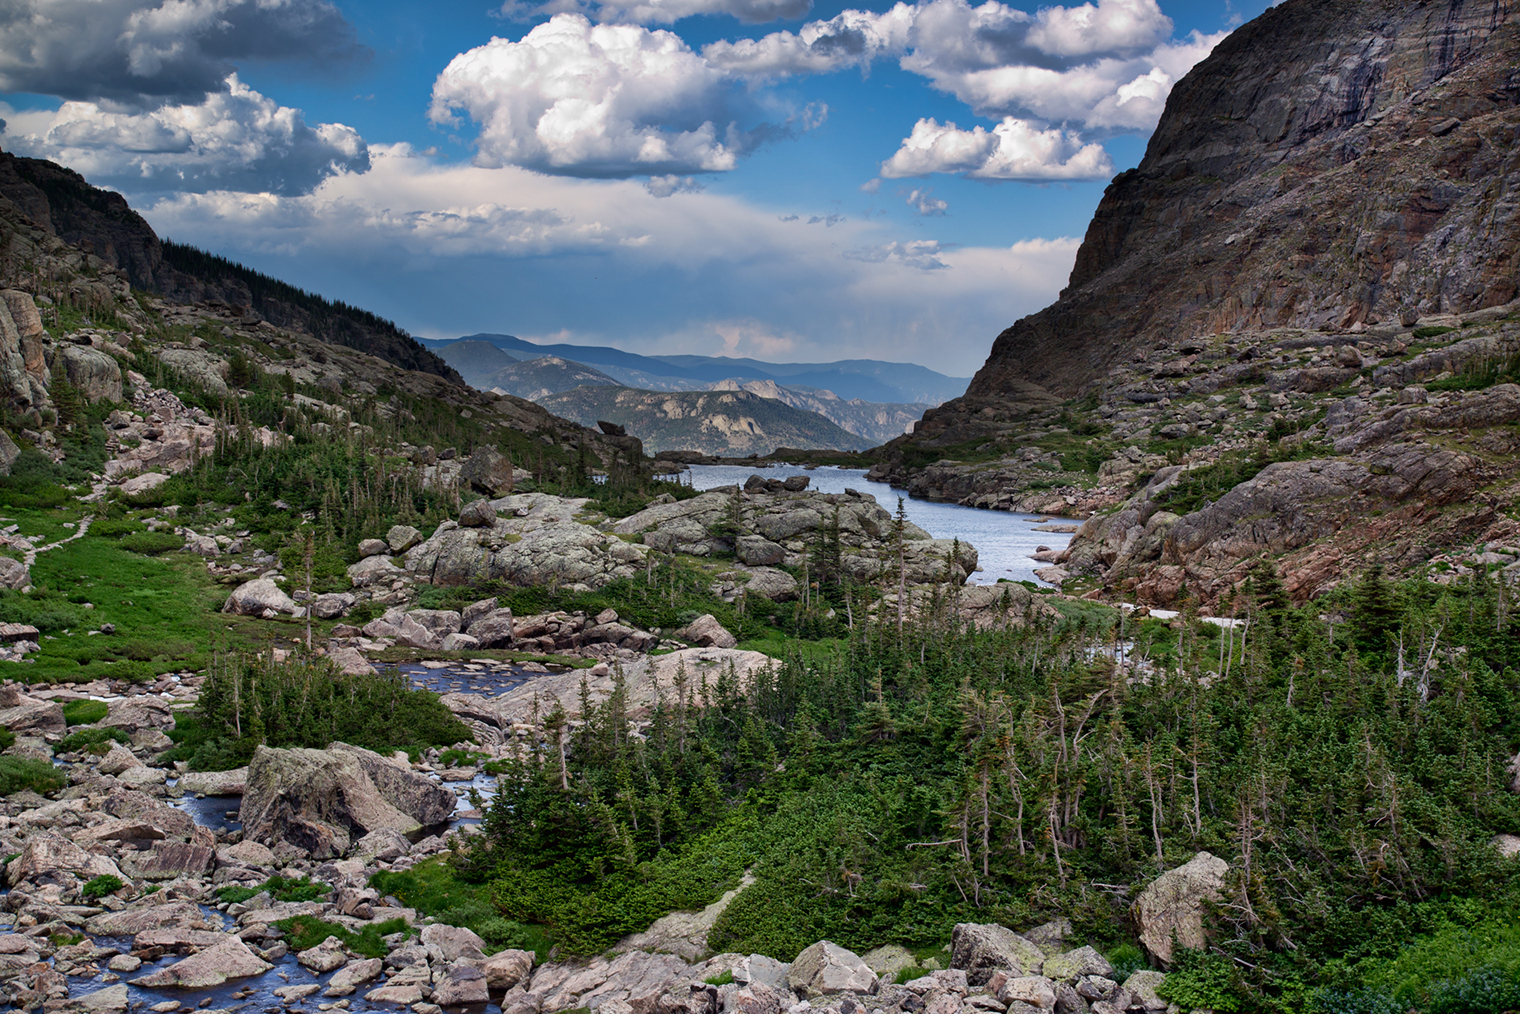 Above Timberline Falls in Rocky Mountain National Park. Image by Steven Bratman / CC BY 2.0